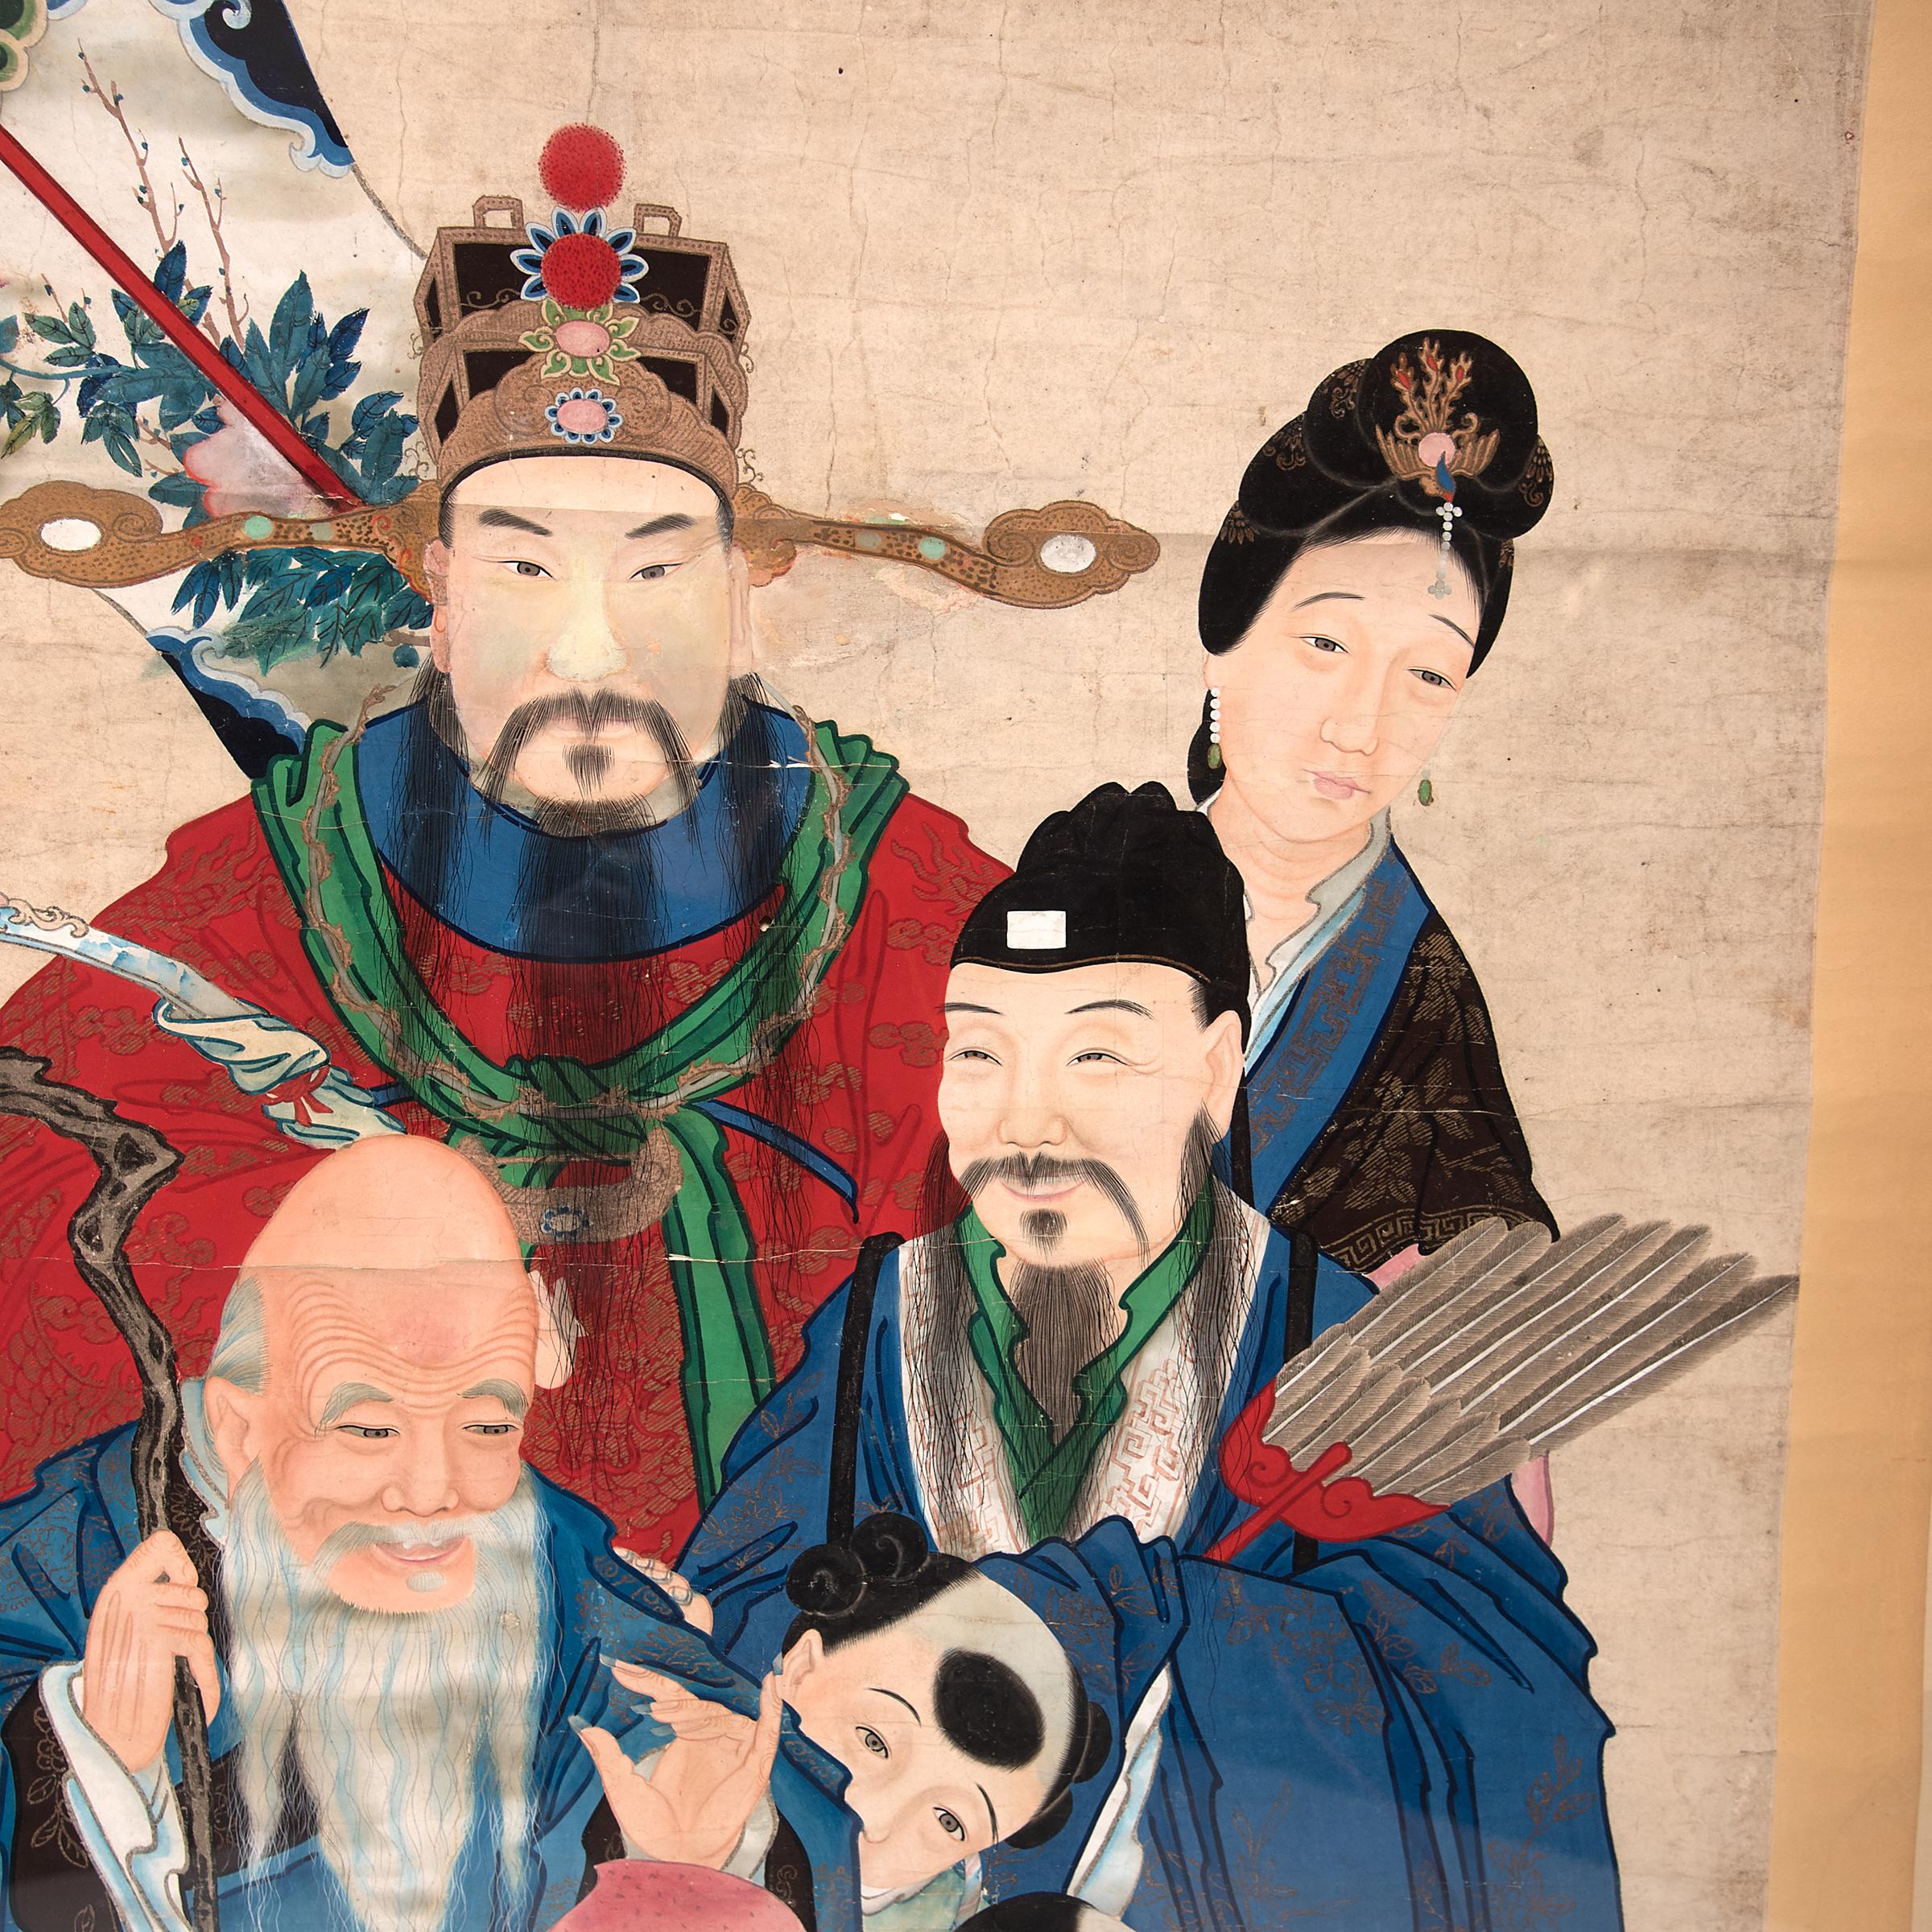 In celebration of the lunar New Year festival, it was traditional all over China to hang special decorations. In a city called Wuqiang, local artists made lacquer scroll paintings laden with symbolism. This framed and finely rendered early 20th